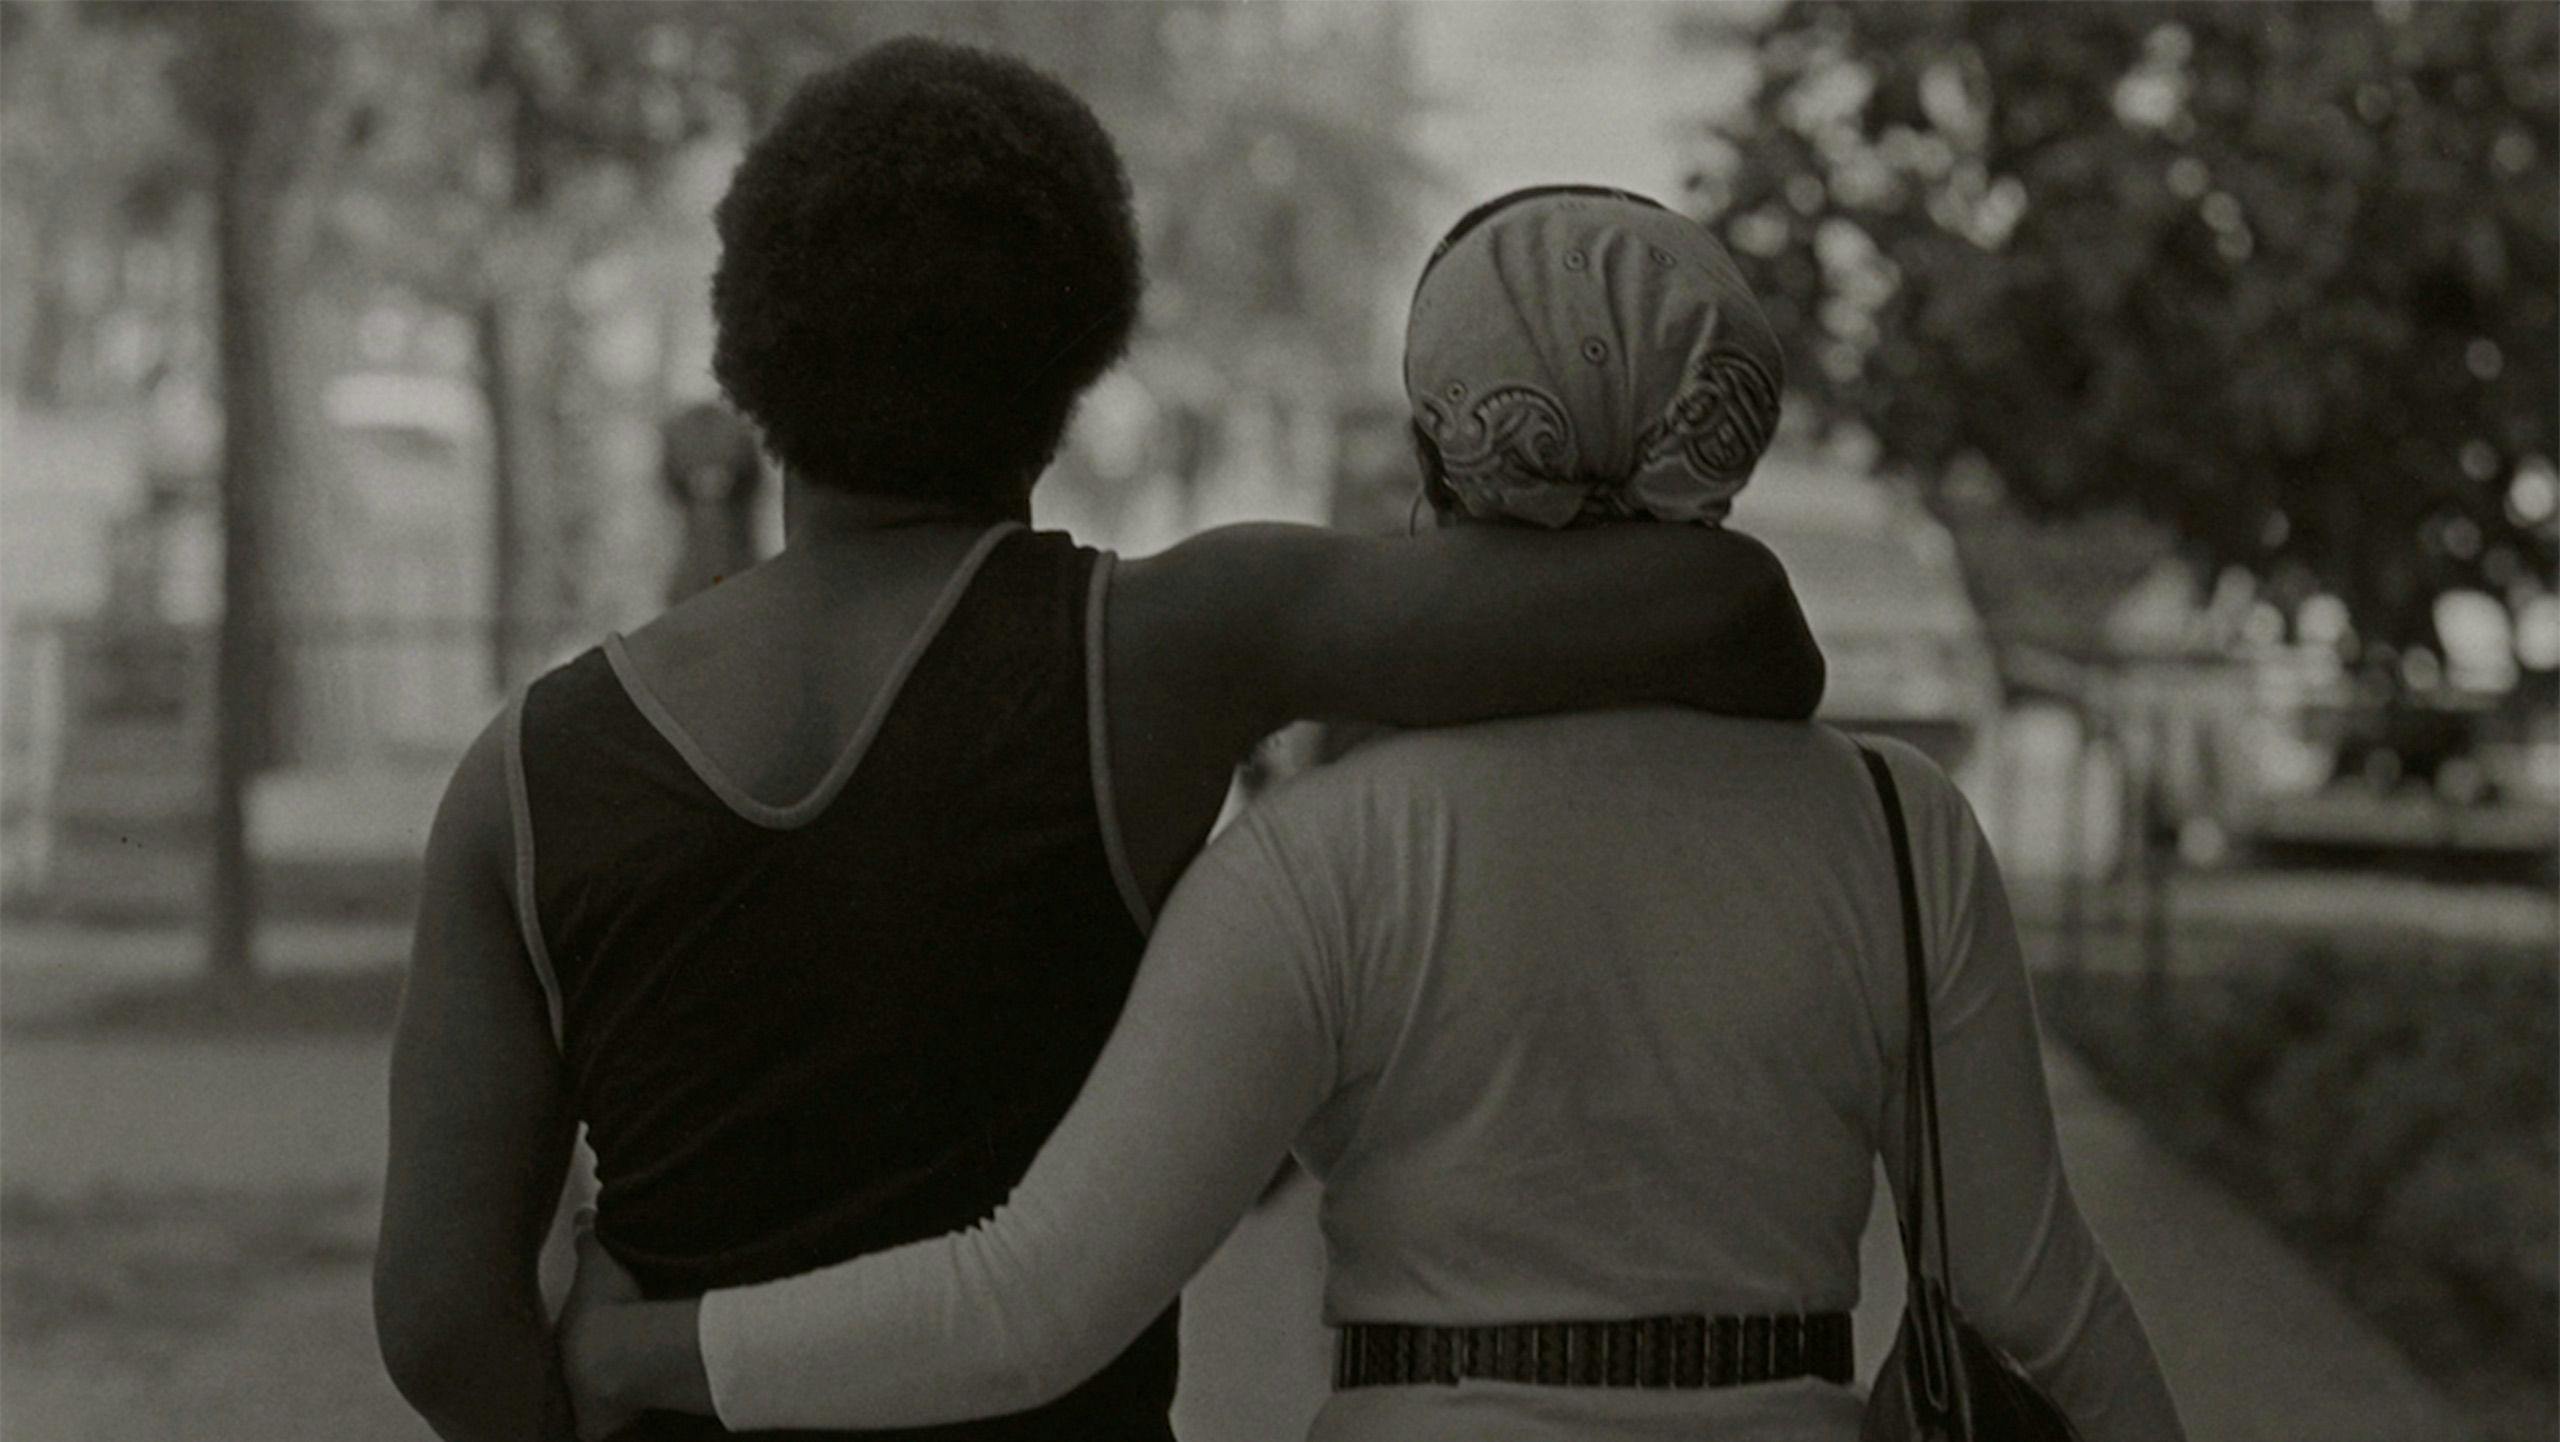 A photograph by Roy DeCarava titled Couple Walking, dated 1979.